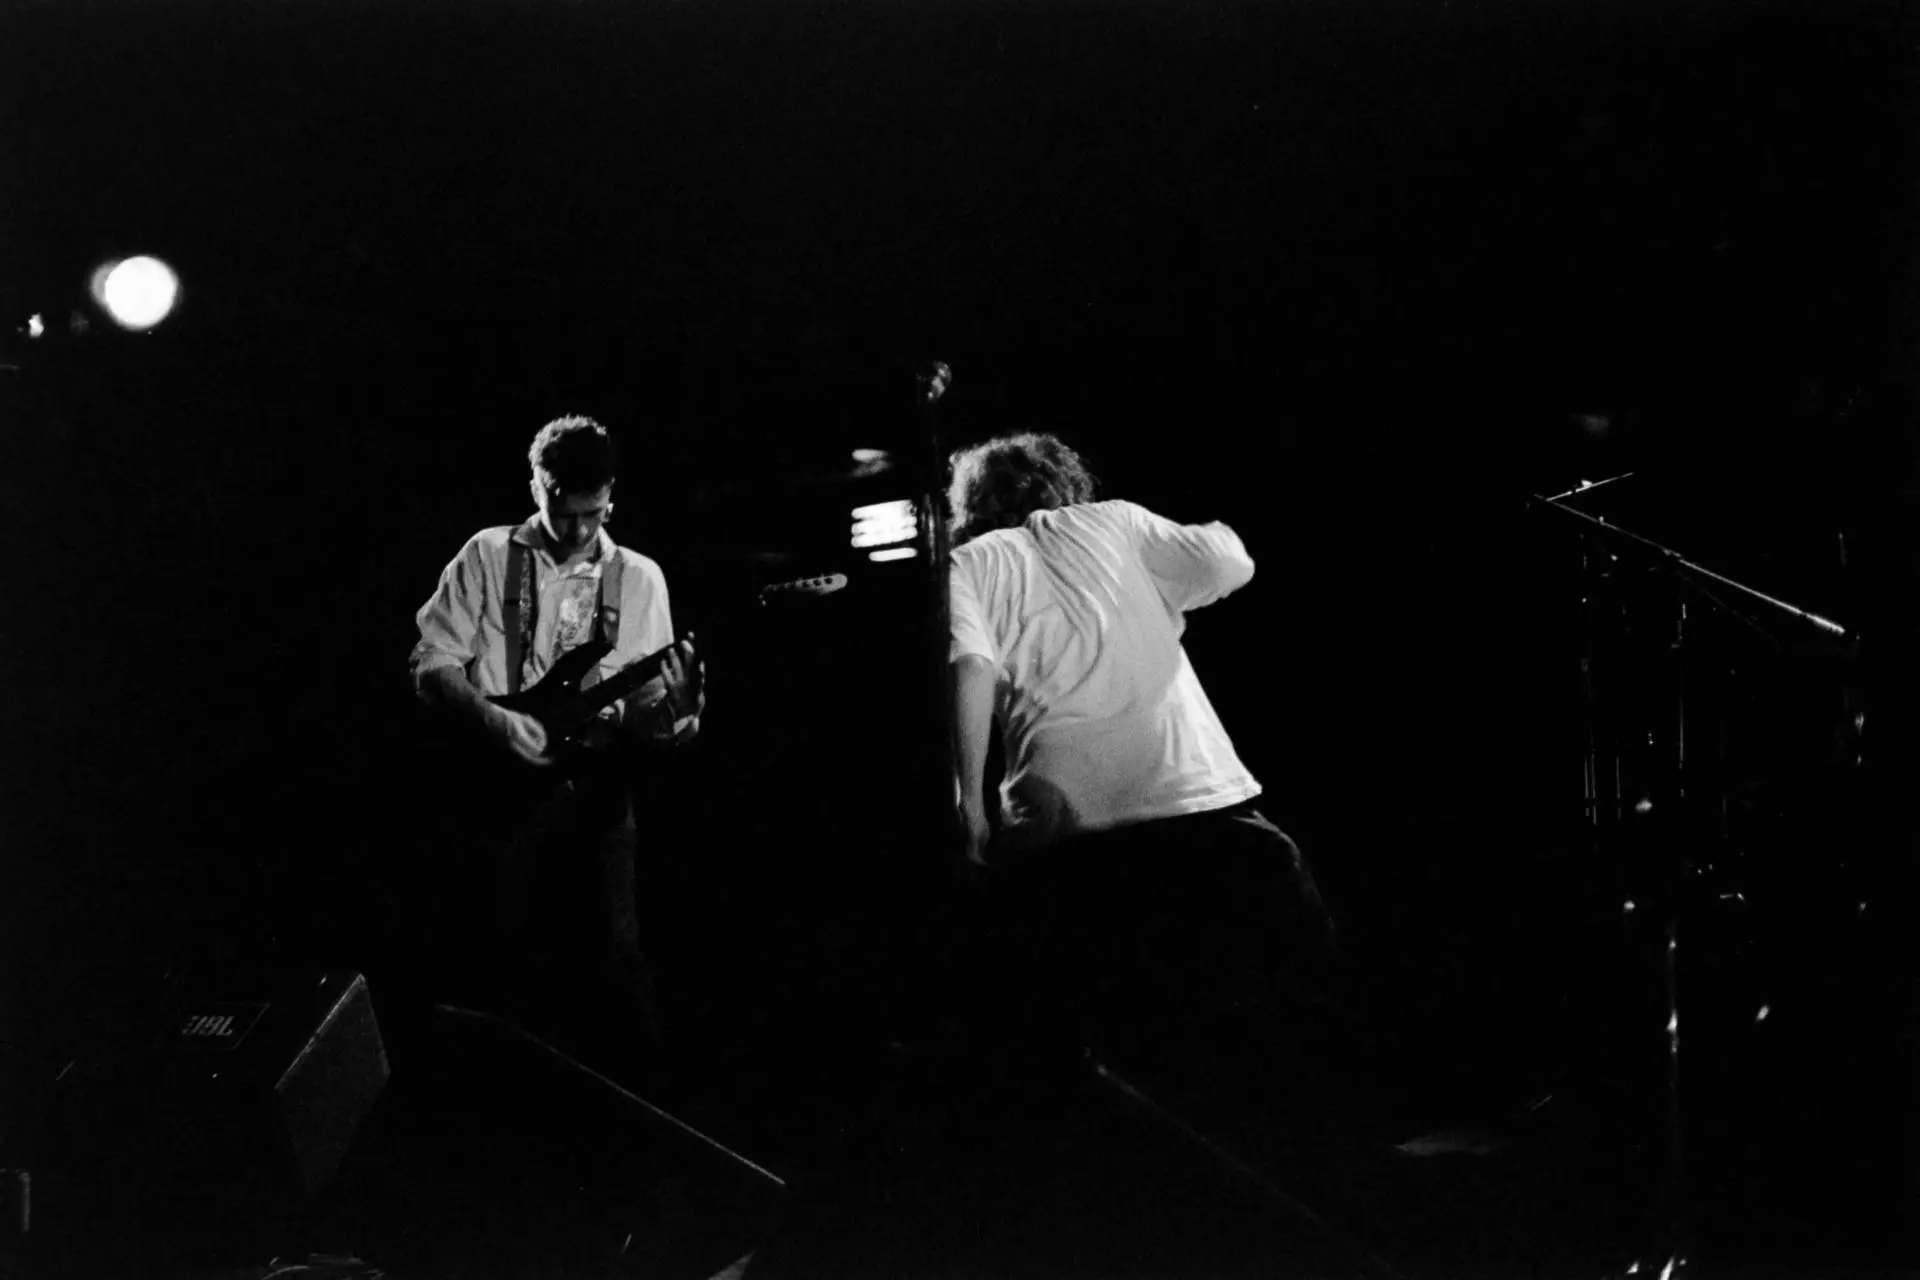 black and white image of a man singing, with a man playing the guitar in the background